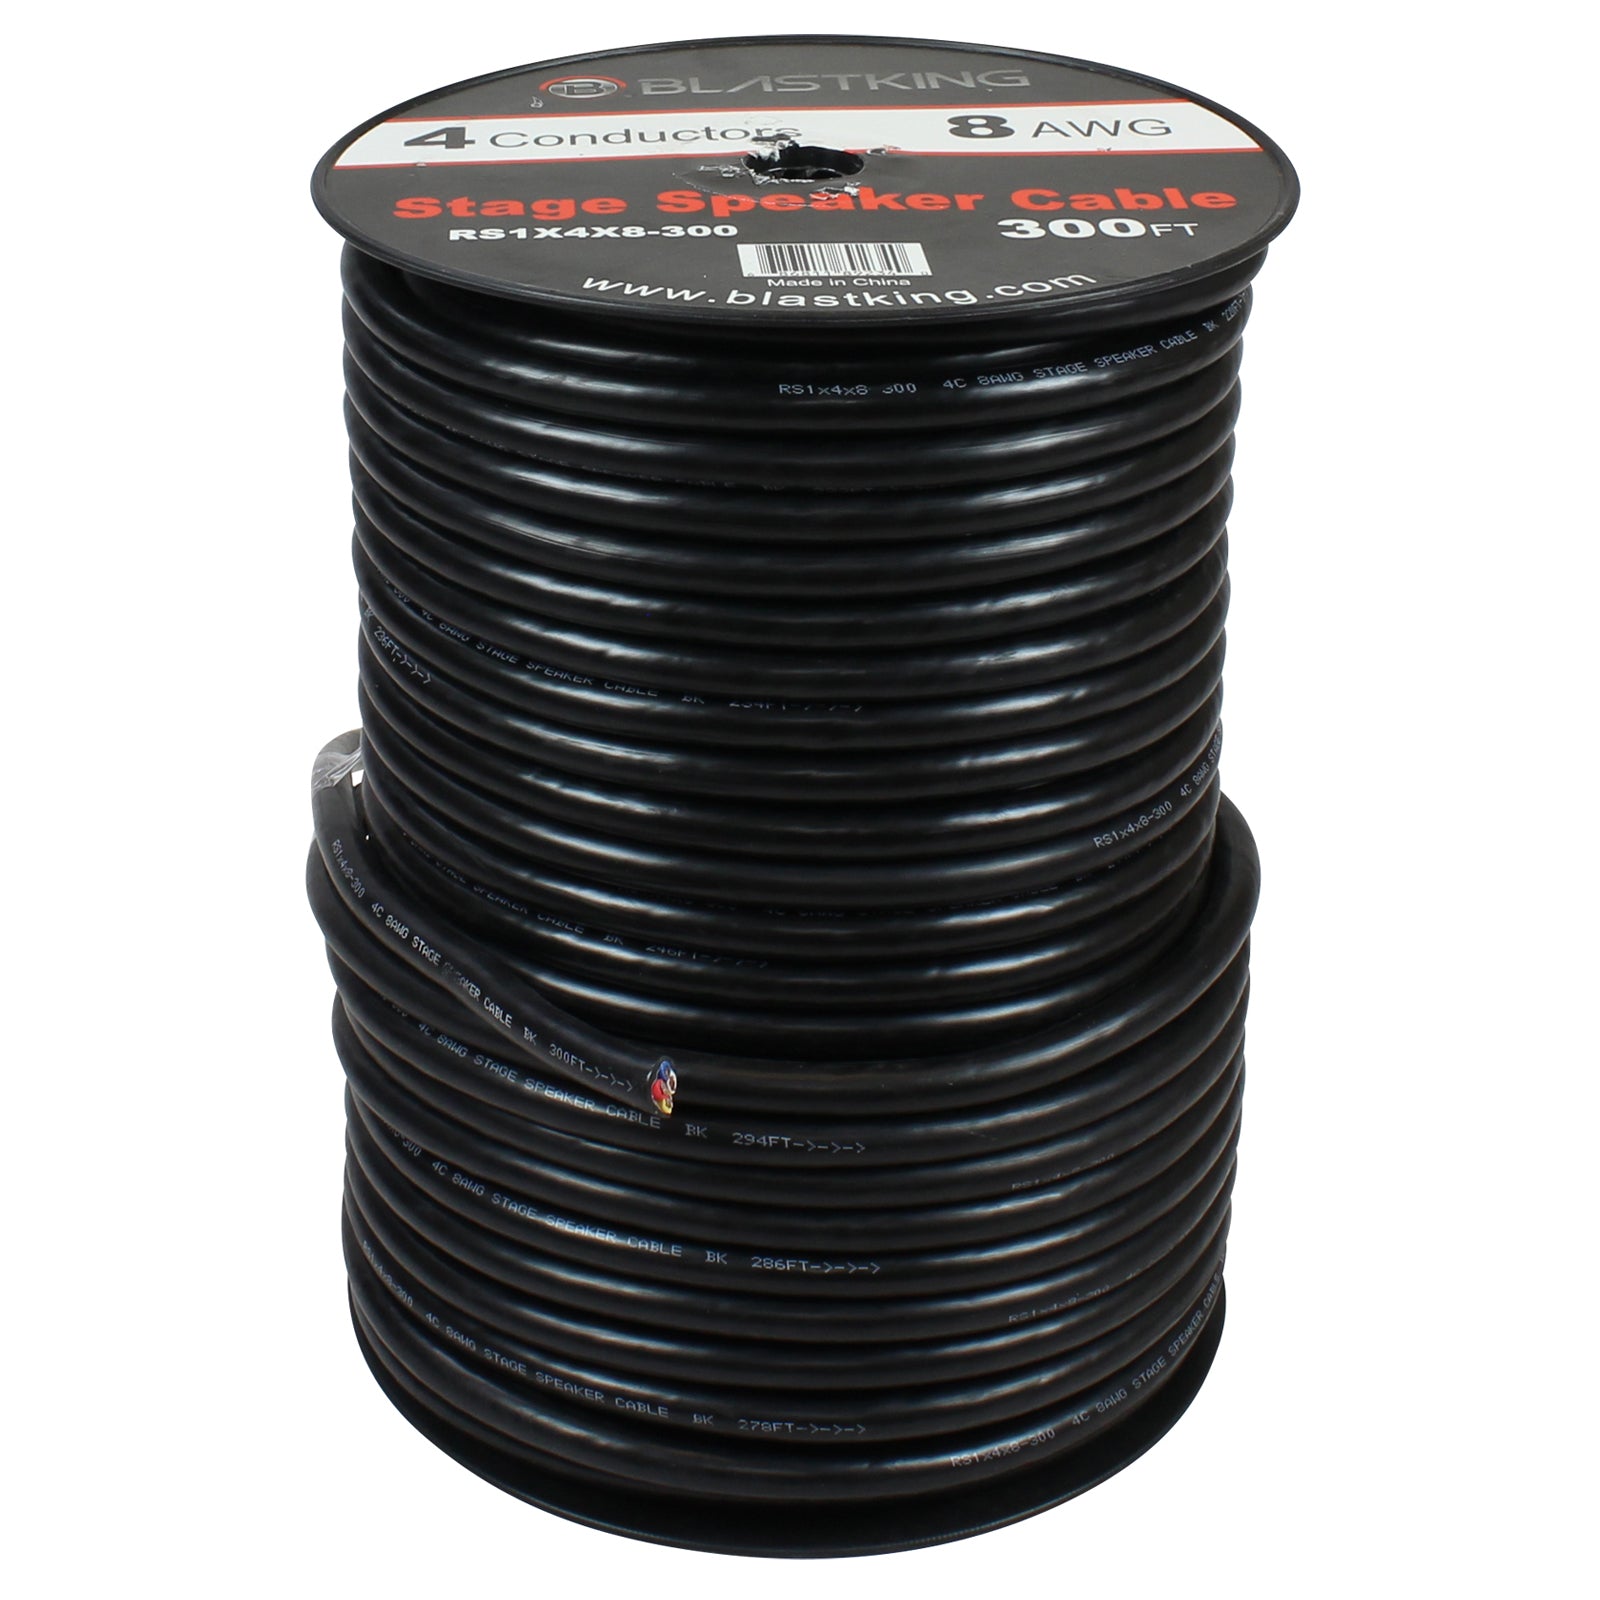 Blastking RS1X4X8-300 8 AWG 4-Conductor Speaker Cable 300 Ft